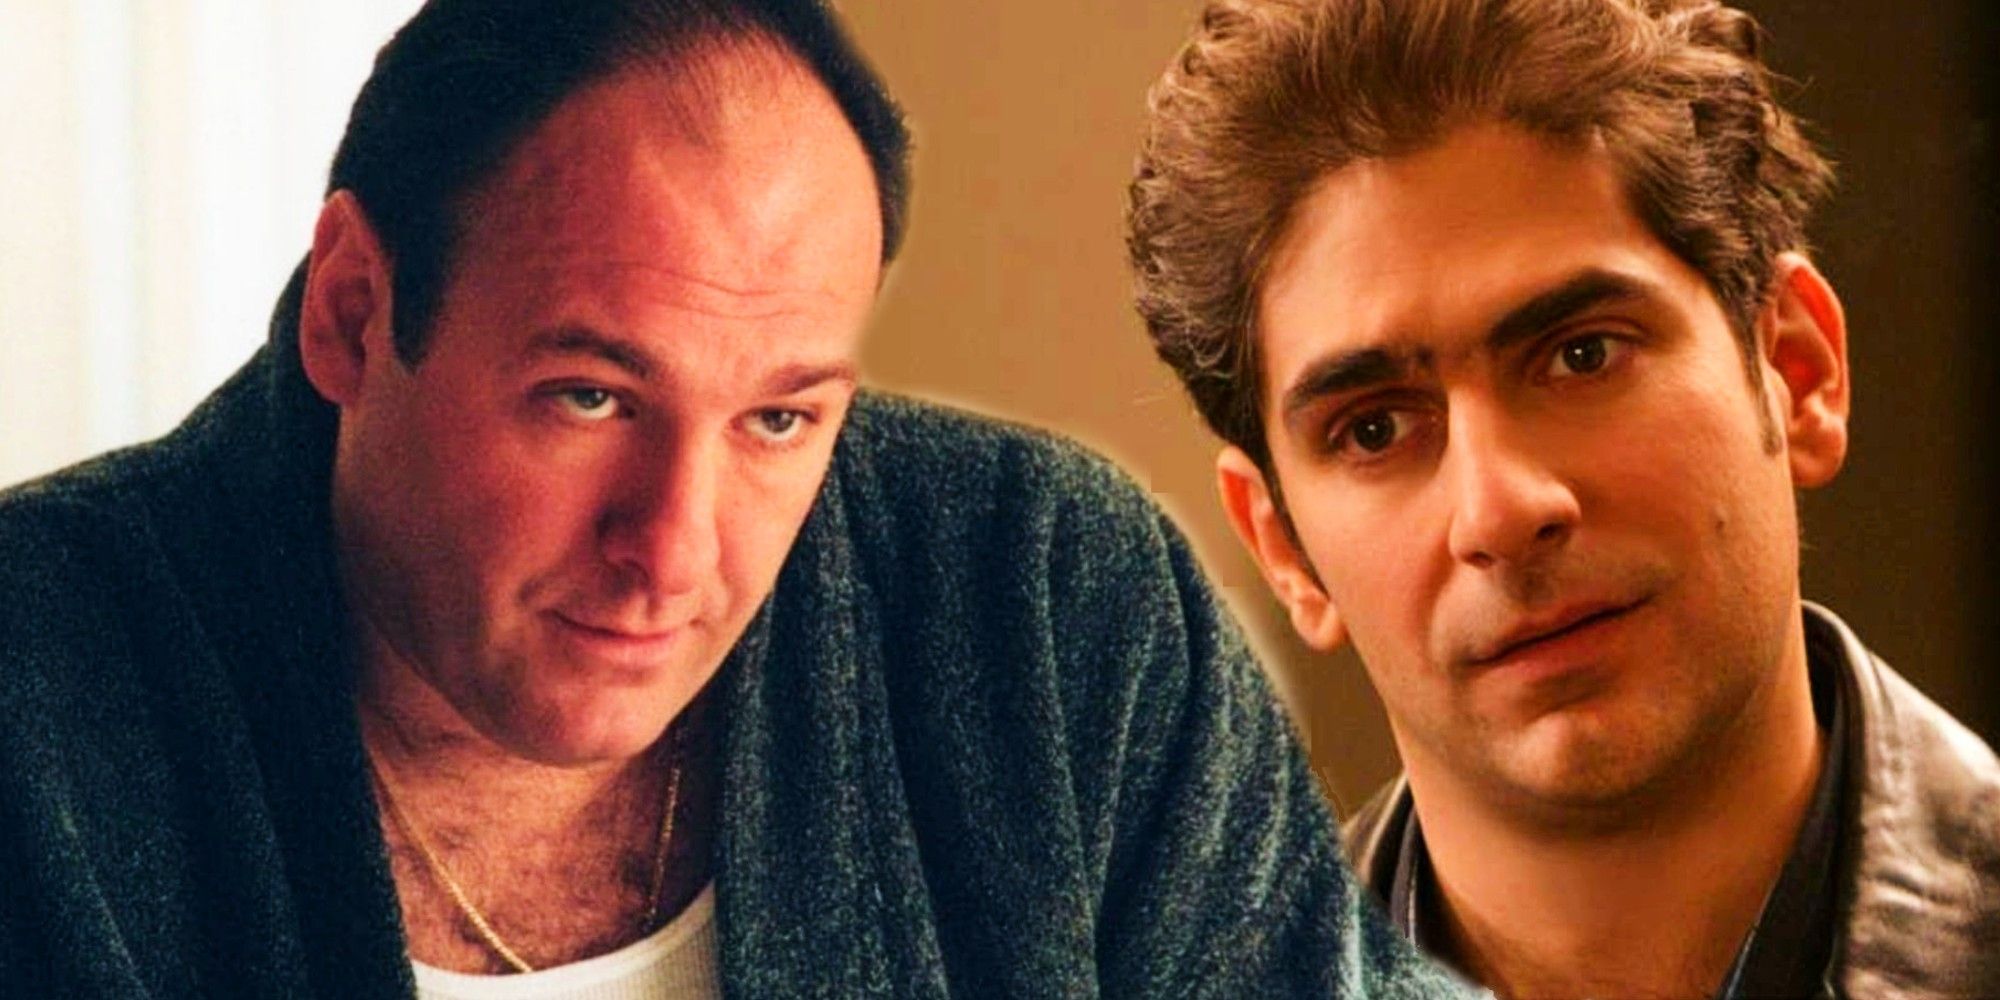 Tony Soprano and Christopher Moltisanti, The Sopranos - similarity between the two characters